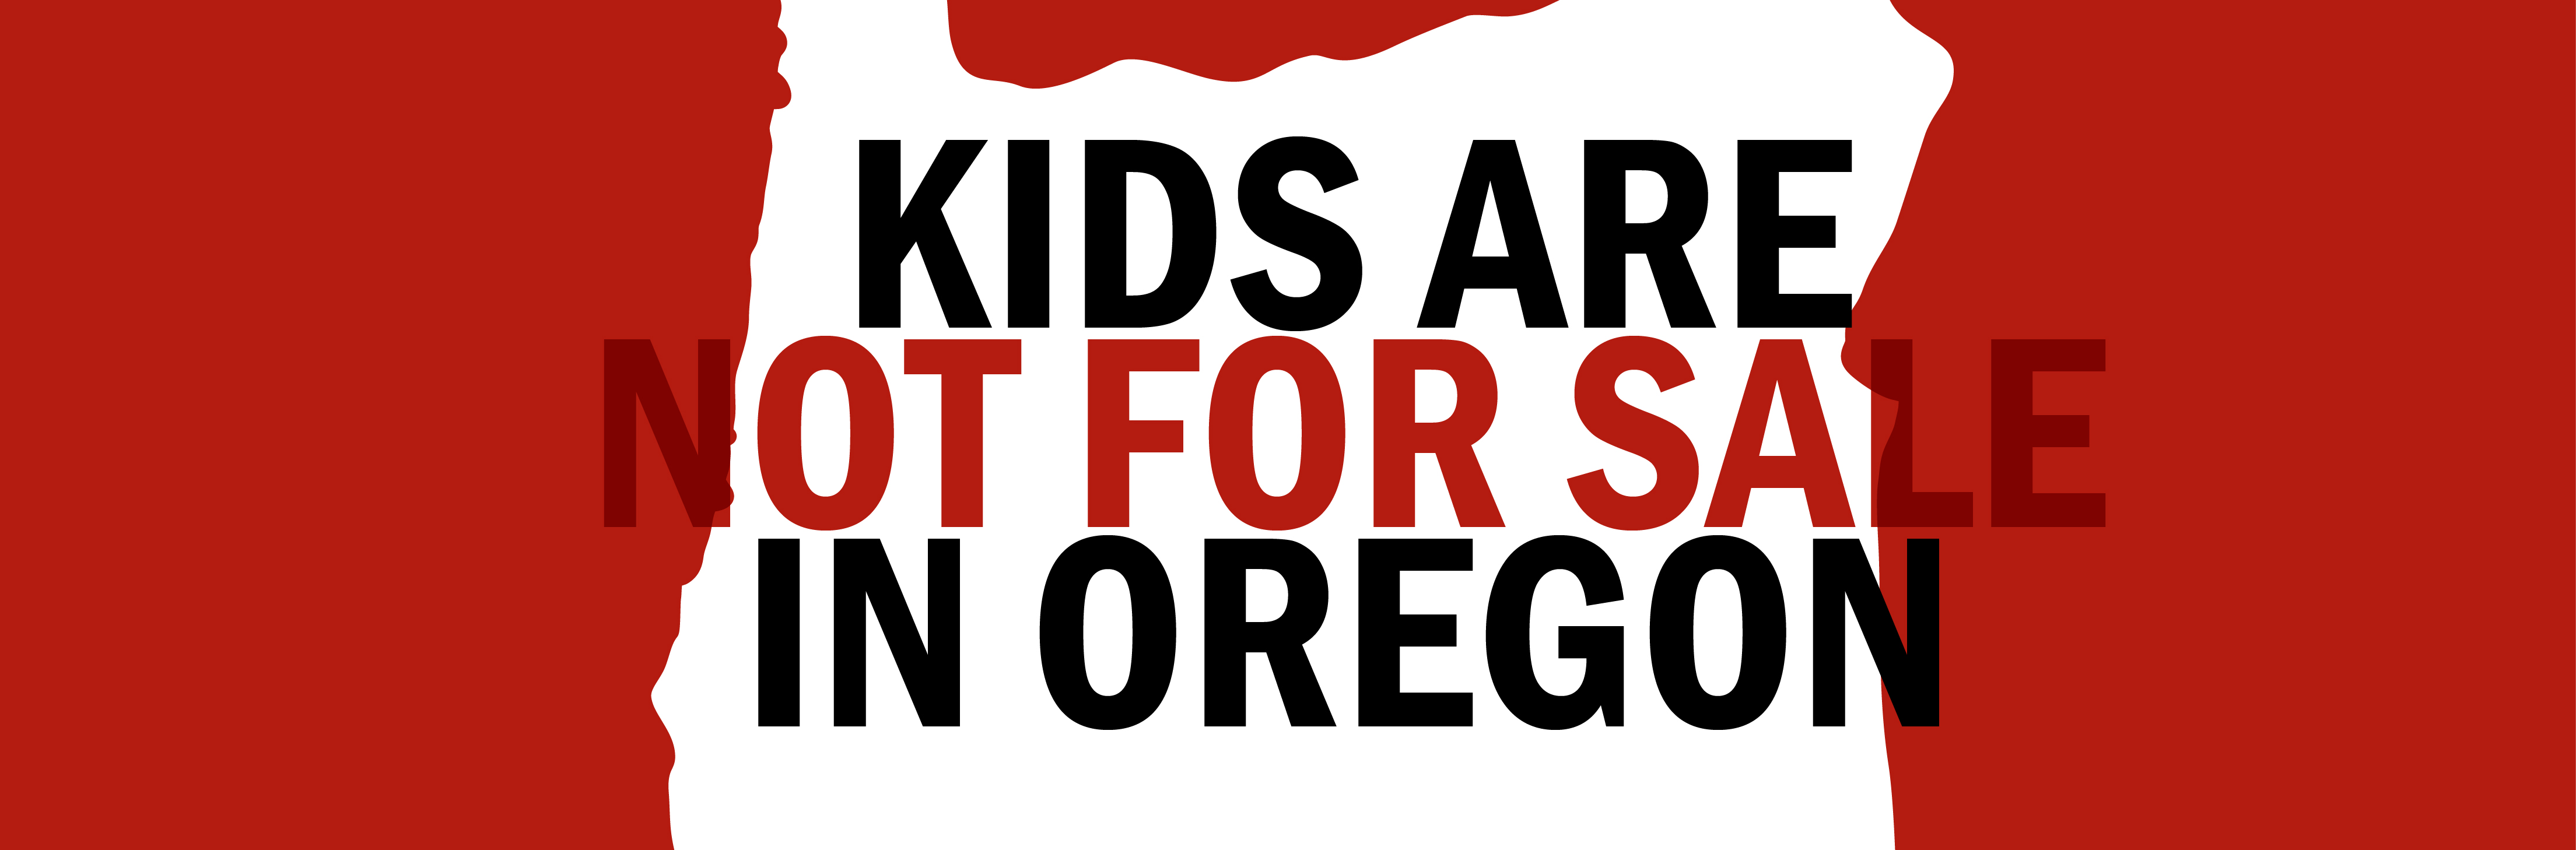 Kids are not for sale in oregon - banner 1